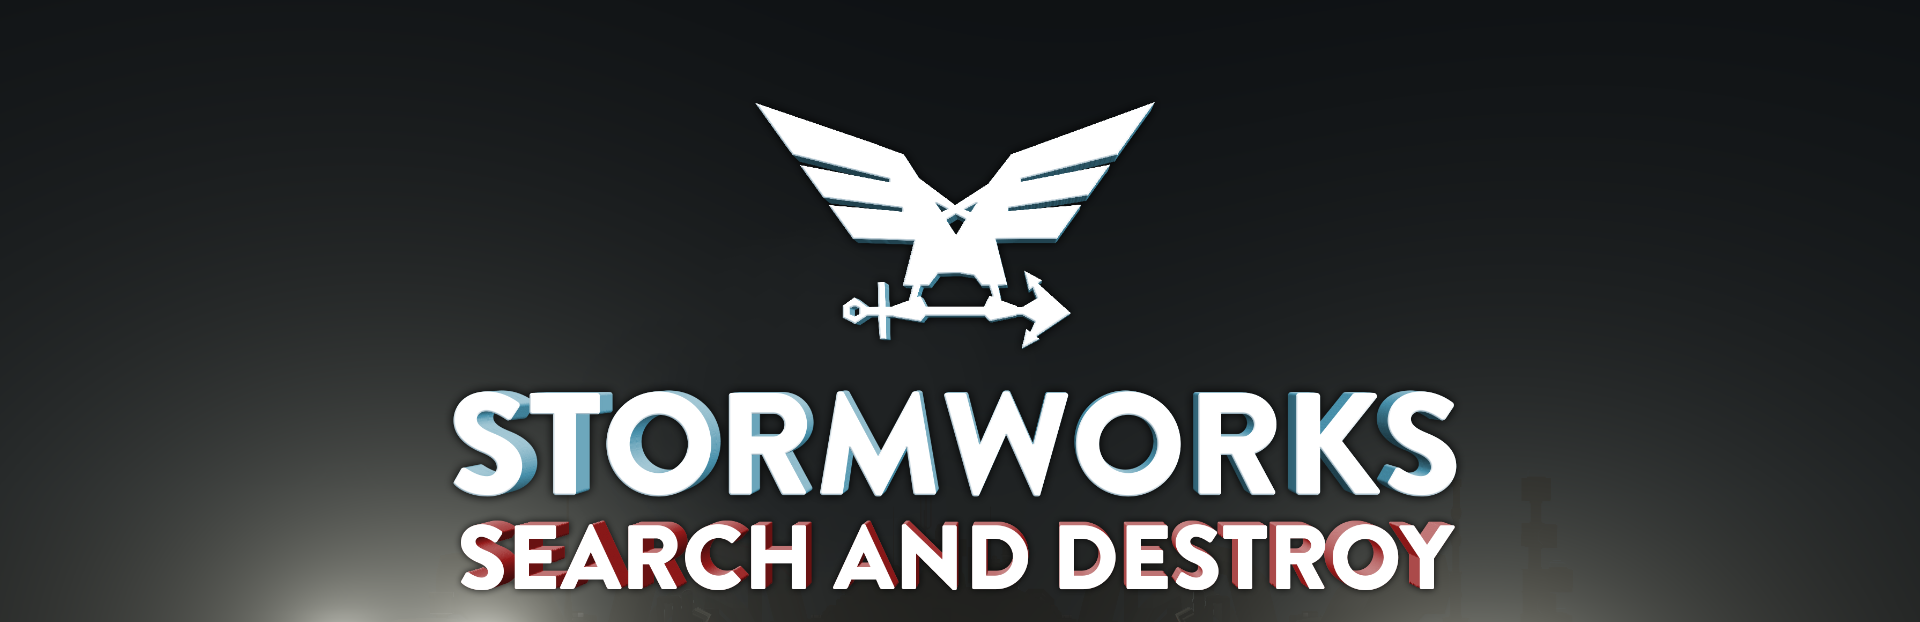 stormworks search and destroy conquest